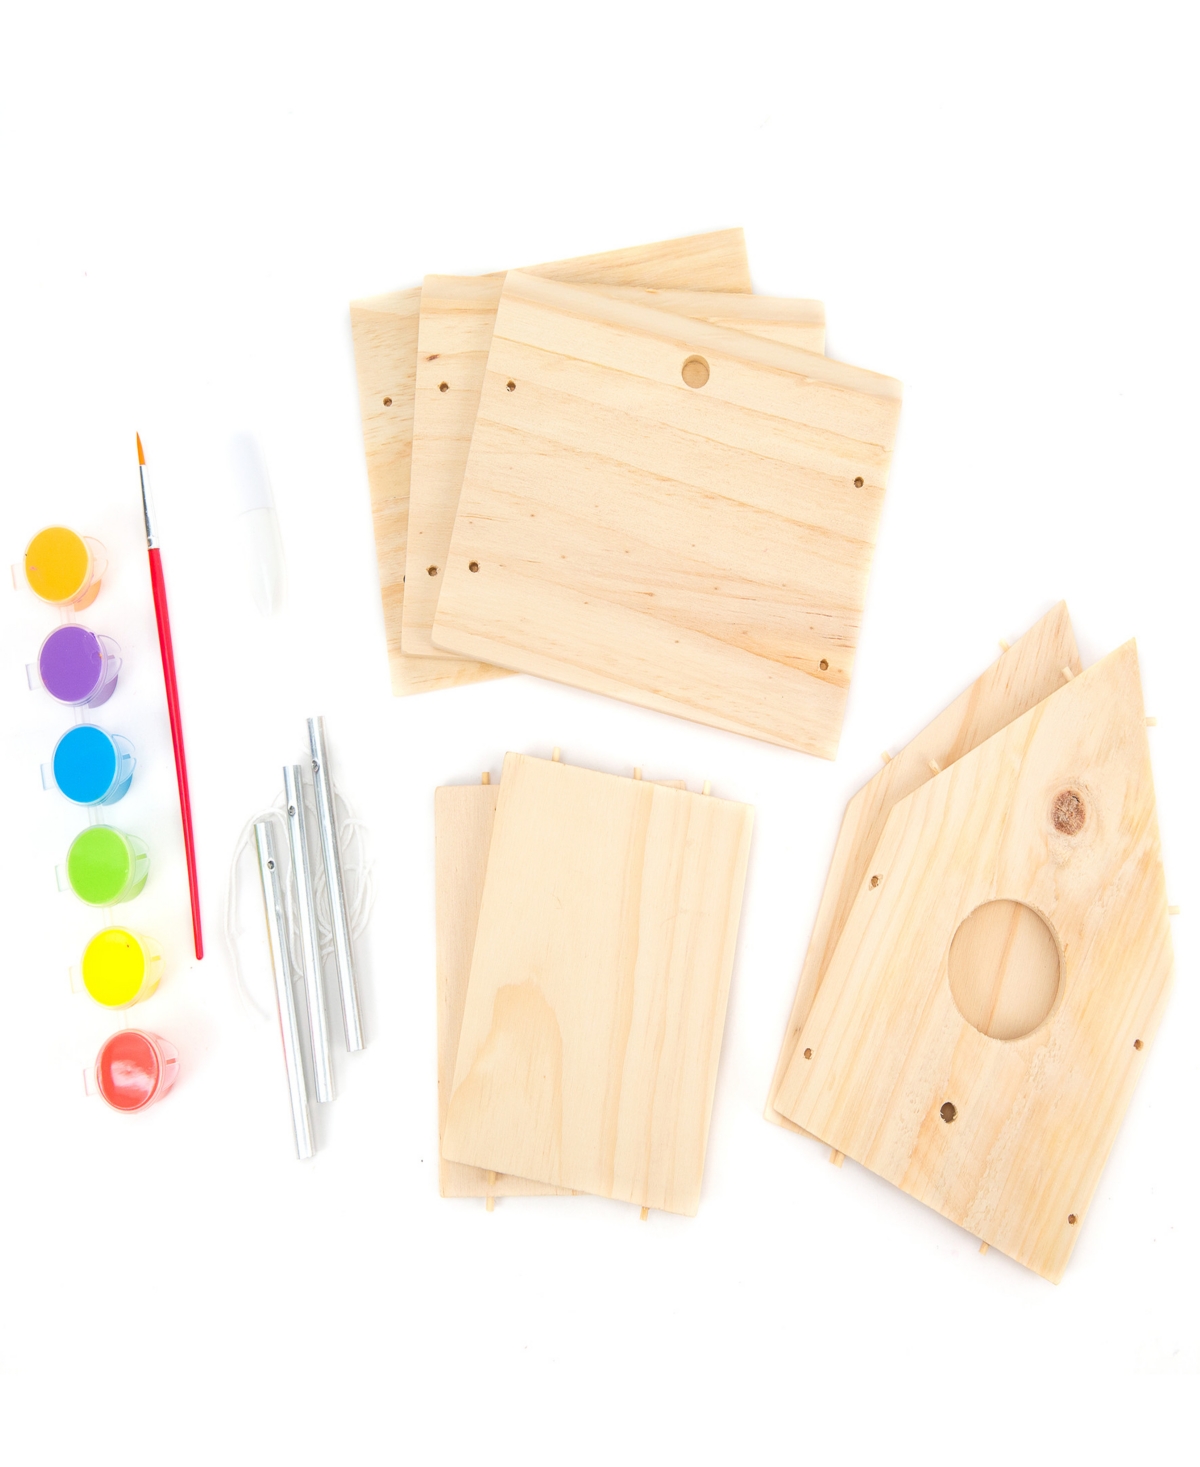 Paint Your Own Birdhouse Playset - Multi